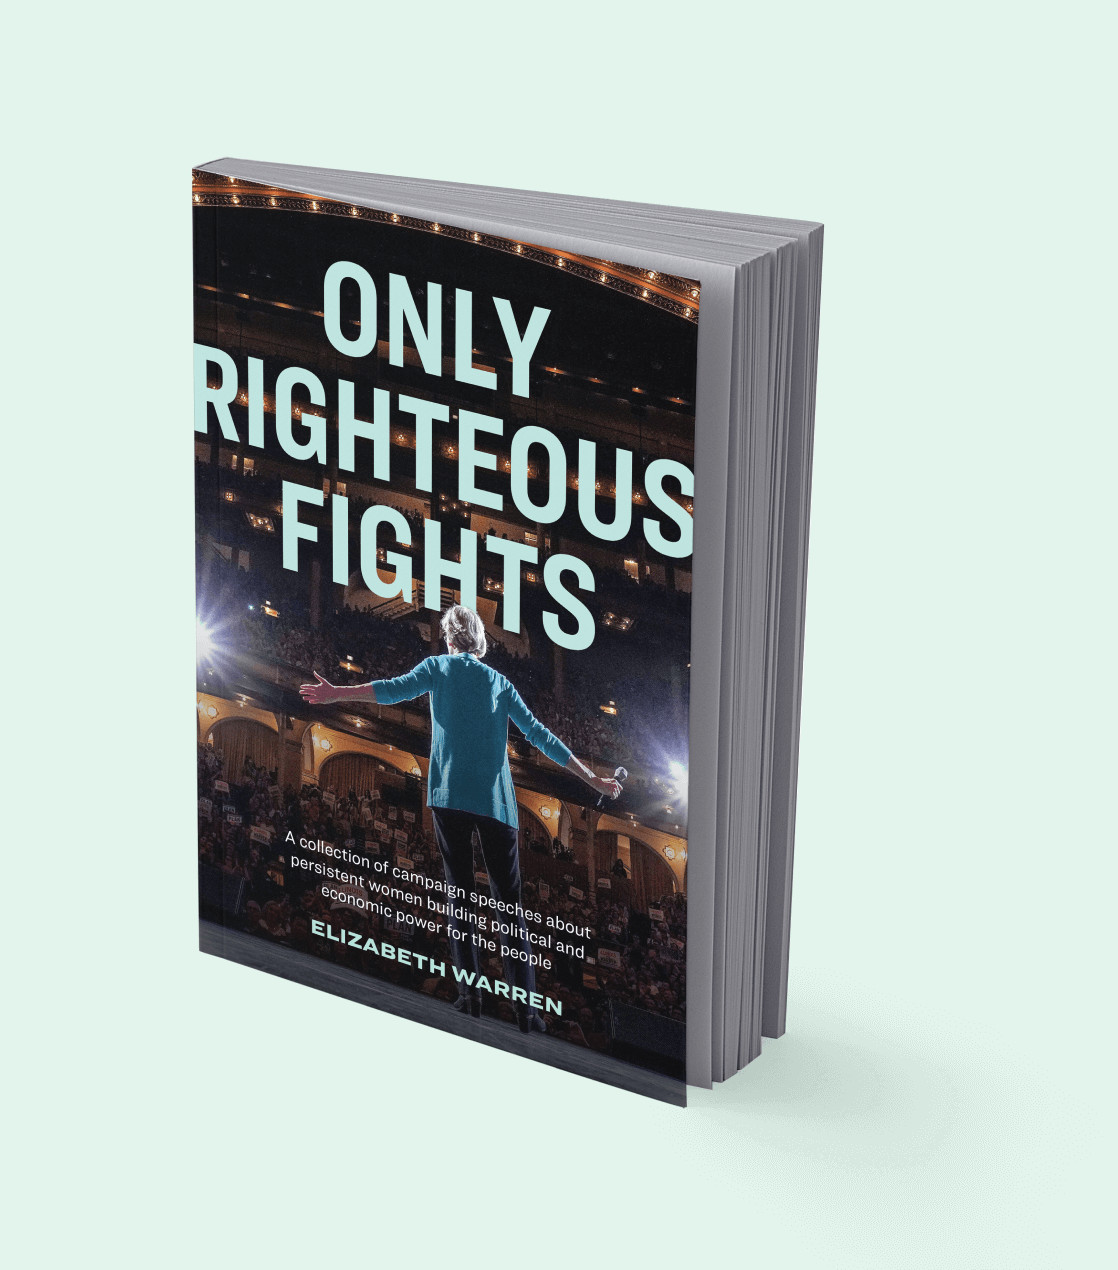 Photo of the "Only Righteous Fights" speech collection.